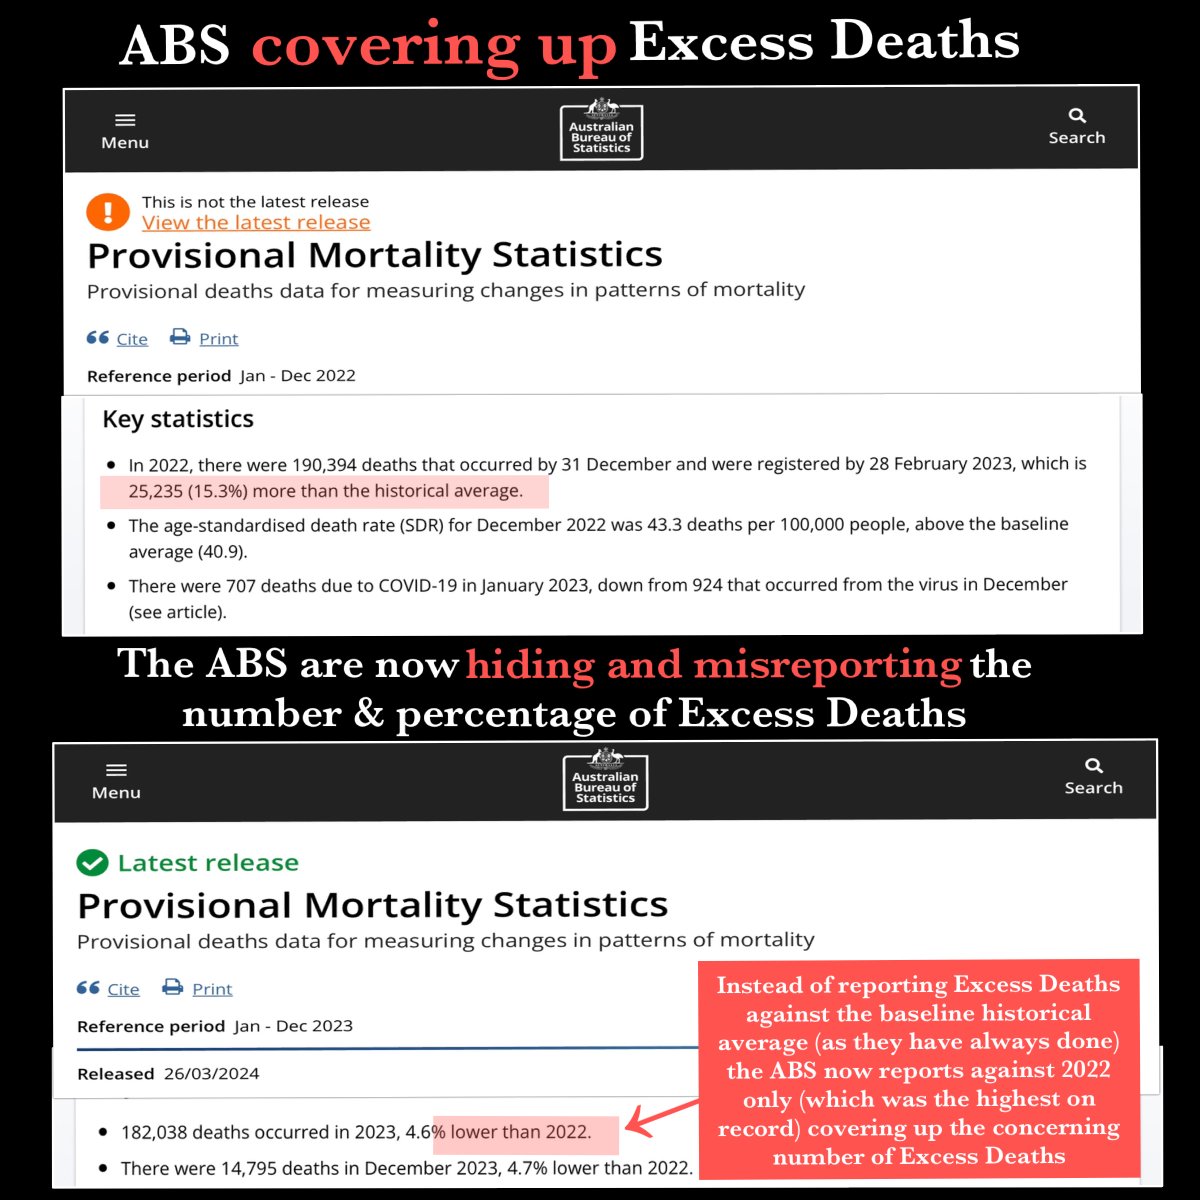 AUSTRALIAN BUREAU OF STATISTICS (ABS) COVERING UP EXCESS DEATHS Australians have come to expect the likes of the ABC, the BOM, the TGA and other Government bureaucracies covering up any data that’s an ‘inconvenient truth’ to the globalist agenda. Now the ABS is getting in on…